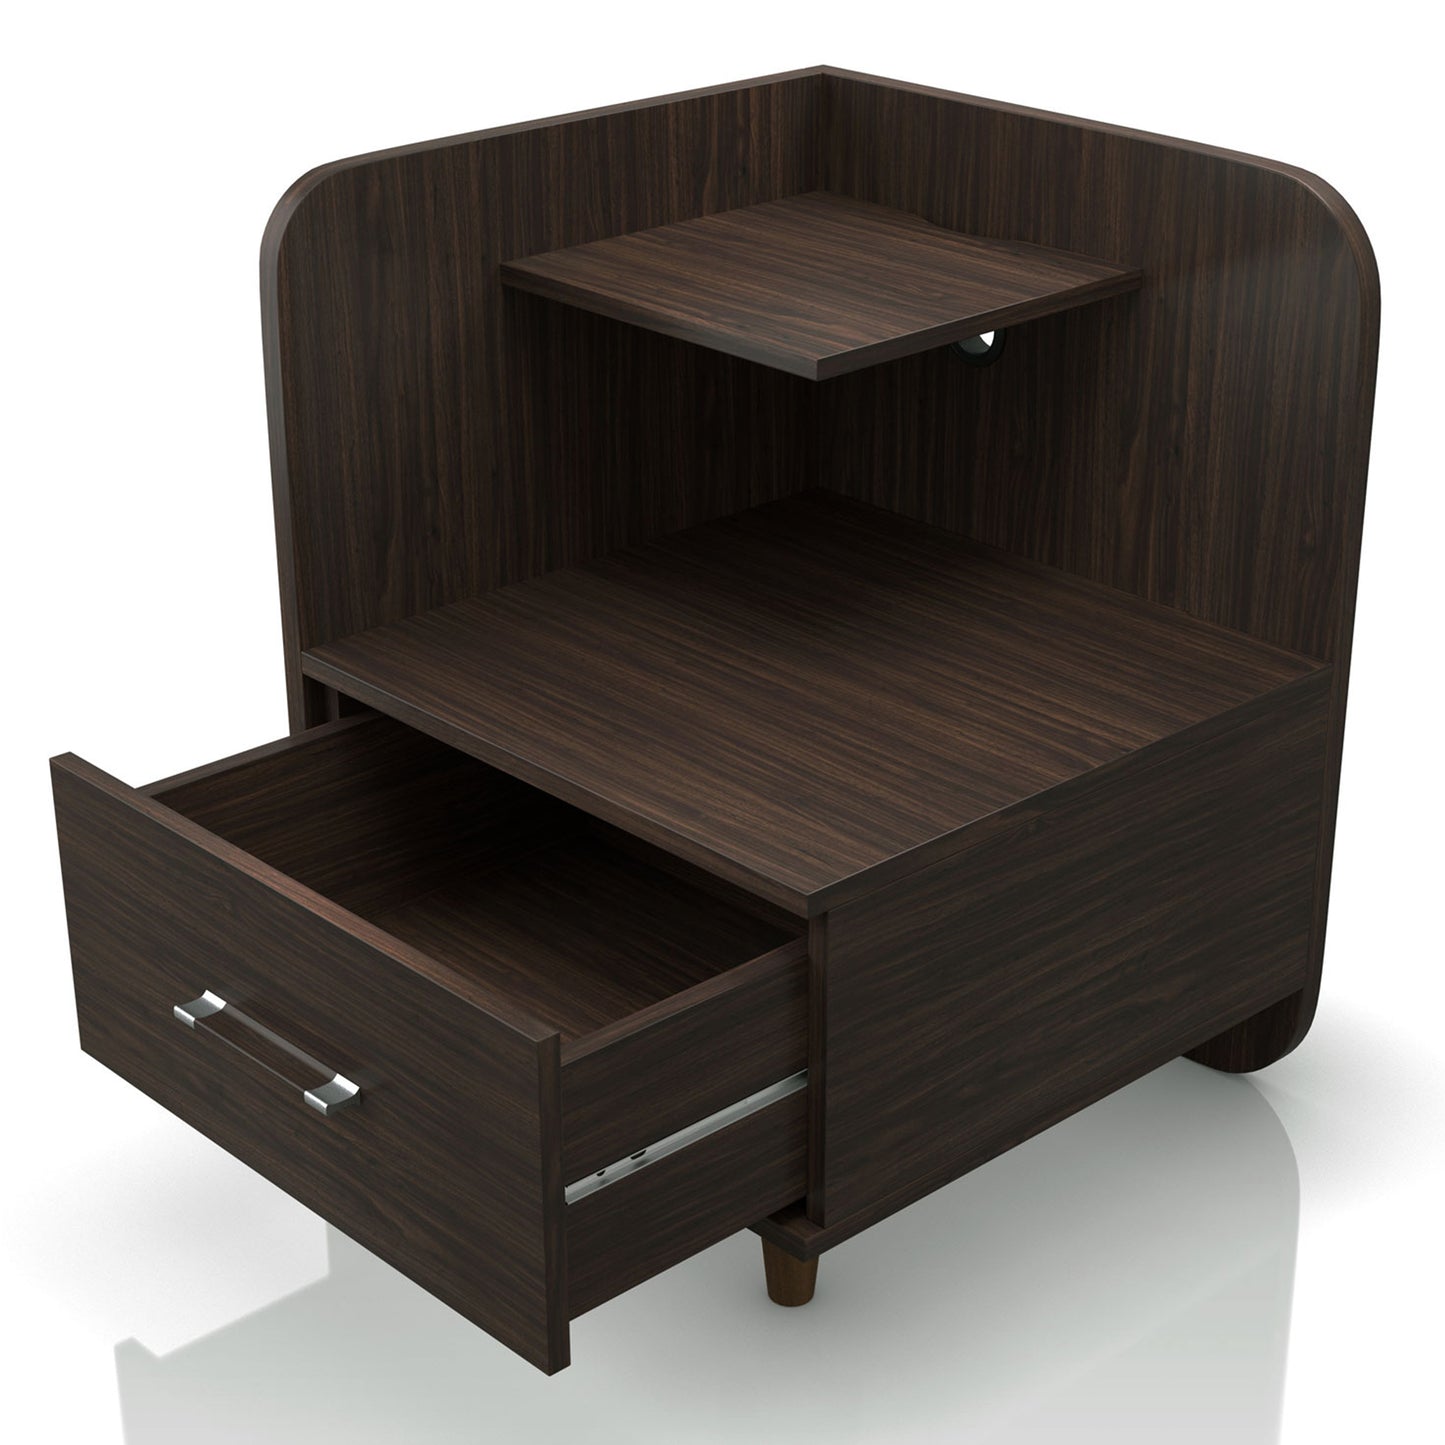 Left angled contemporary wenge one-drawer nightstand with a mini shelf and drawer open on a white background